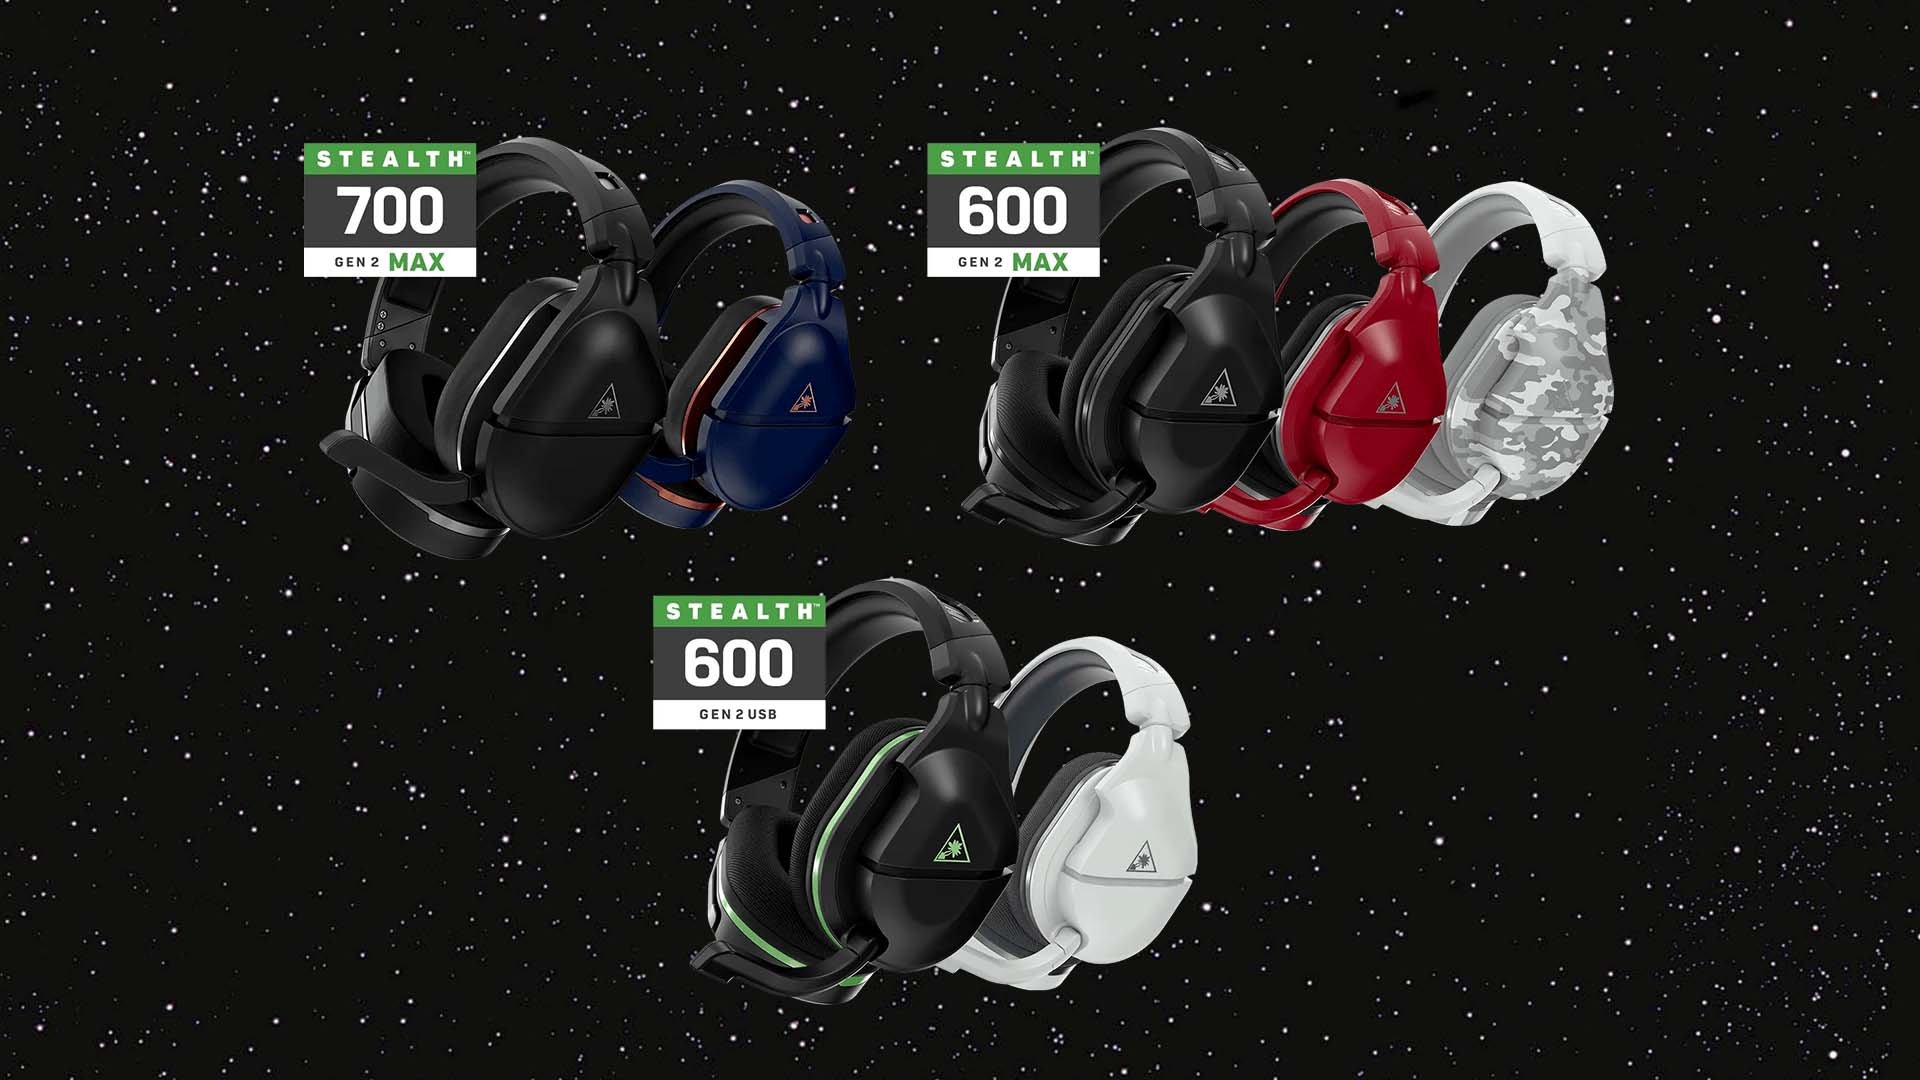 Turtle Beach’s All-New Premium Stealth 700 GEN 2 MAX, Stealth 600 GEN 2 MAX, & Stealth 600 GEN 2 USB Wireless Gaming Headsets For Xbox Are Now Available